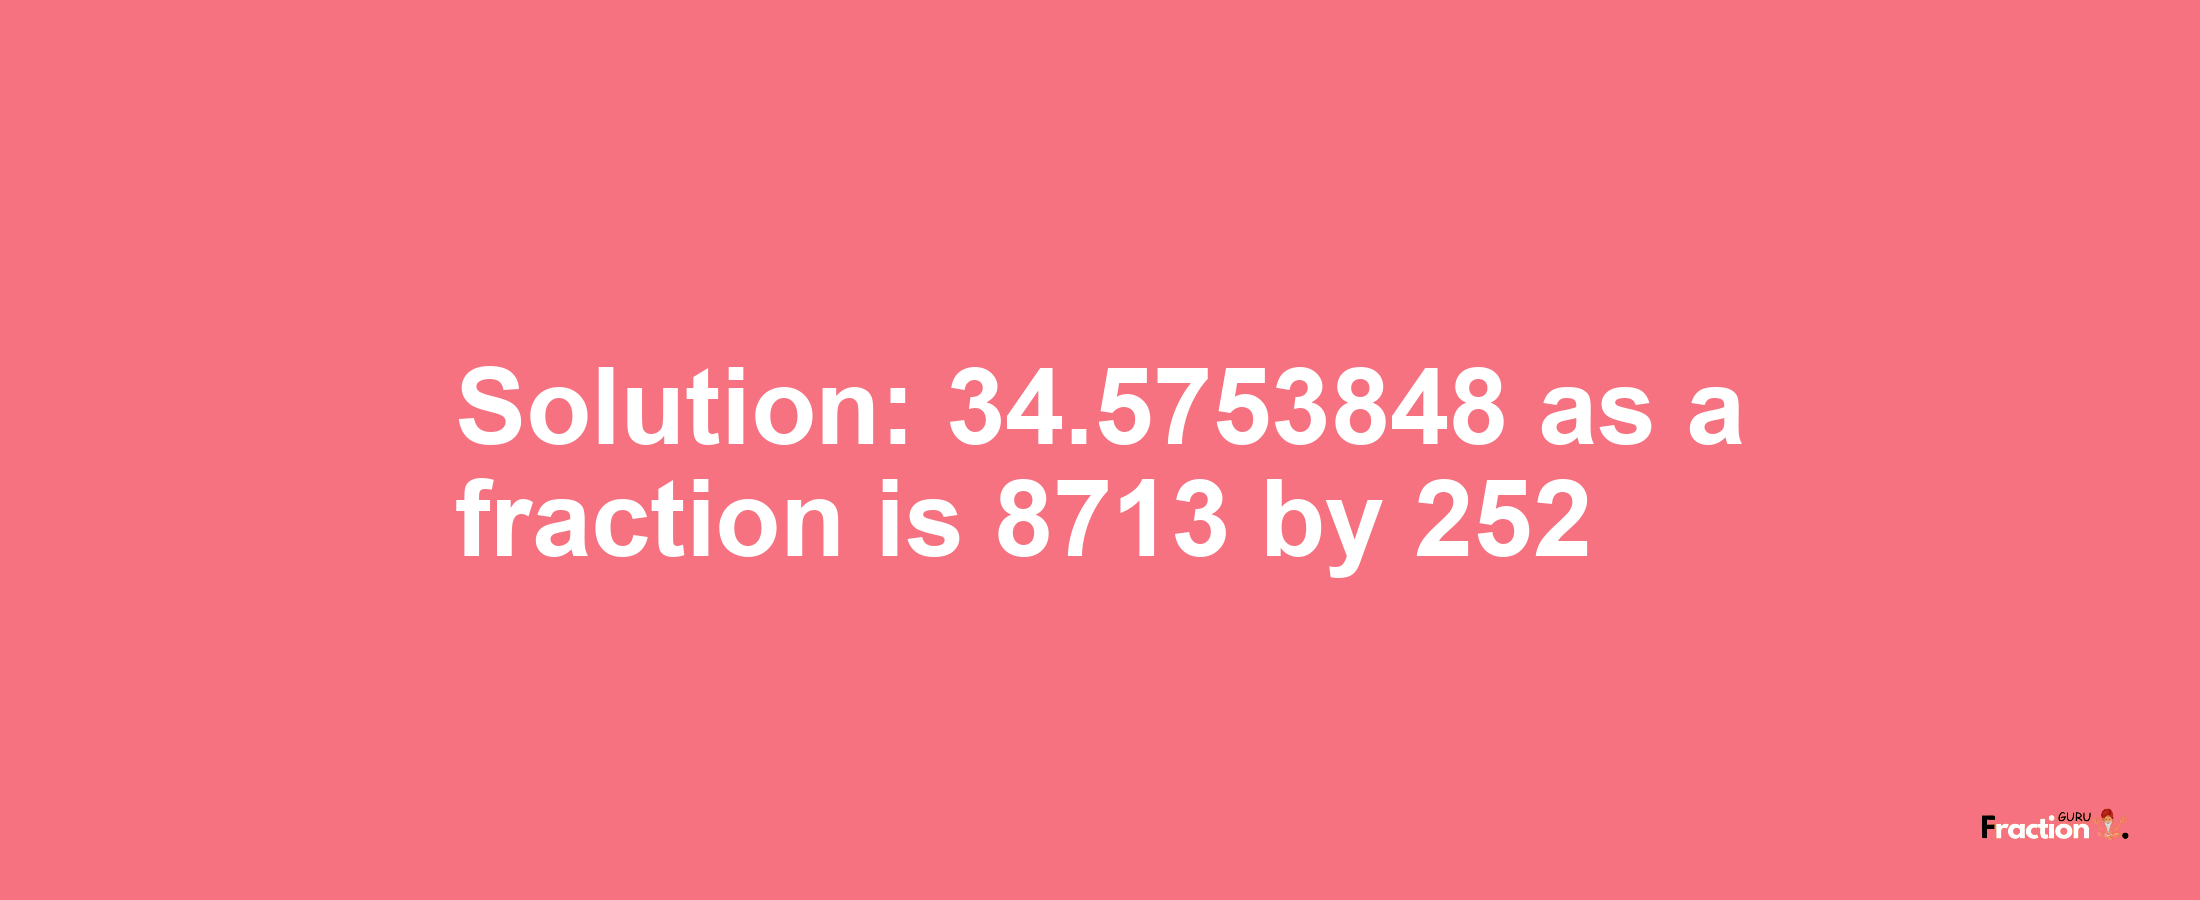 Solution:34.5753848 as a fraction is 8713/252